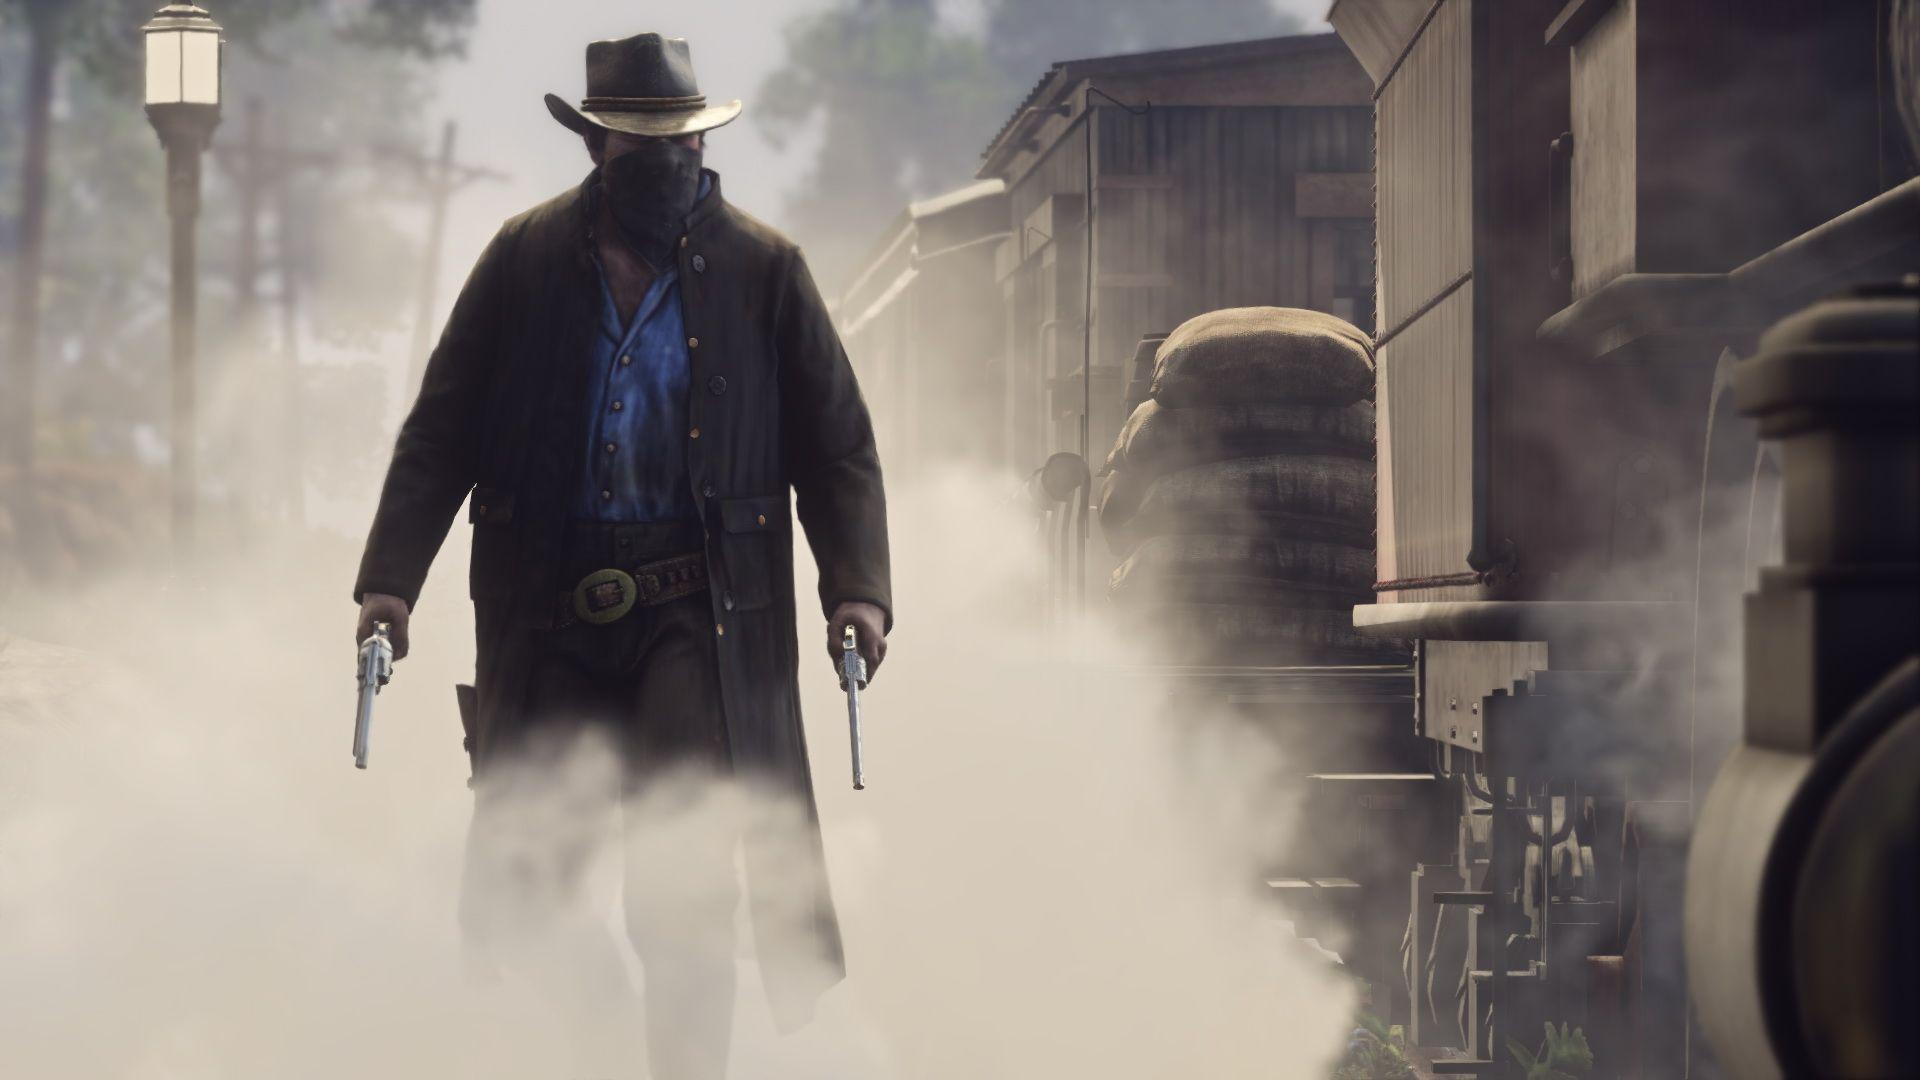 New Red Dead Redemption 2 Trailer To be Released This Week, Rockstar